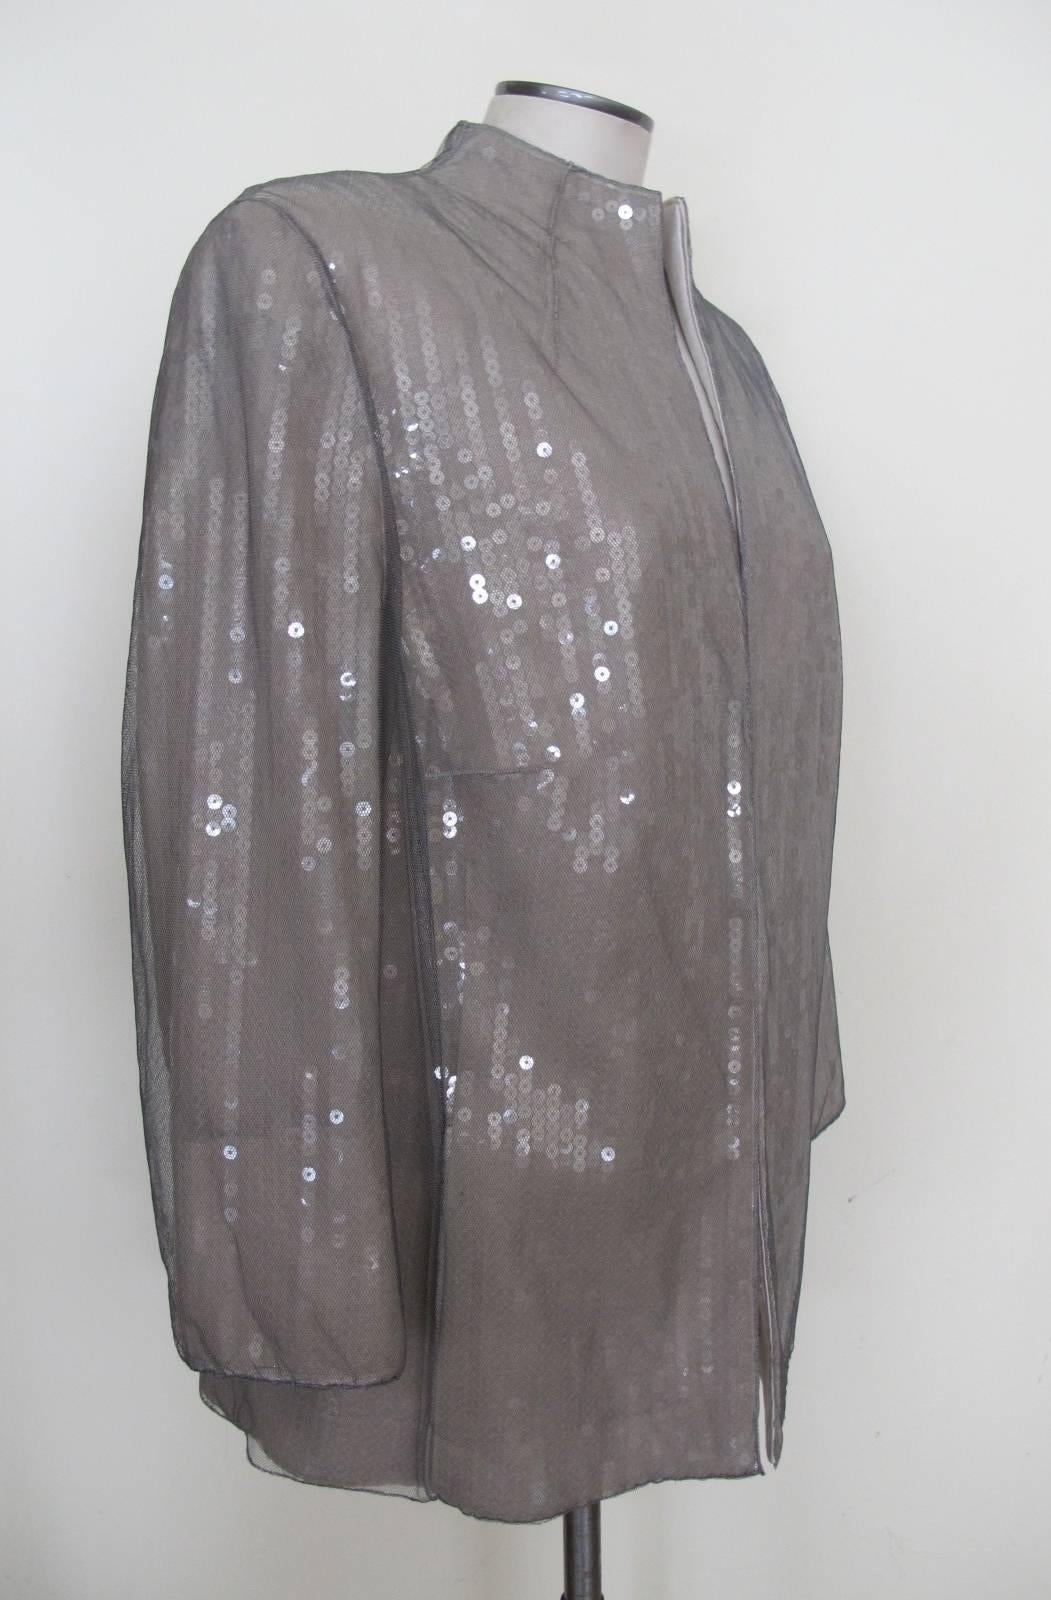 Clear Sequins is the design on ivory silk with exquisite grey netting serving as an overlay covering the sequins. The piece is sheer elegance. The sleeves are 3/4 length. Albert Kriemler, the creative director for Akris, is a genius and is known for